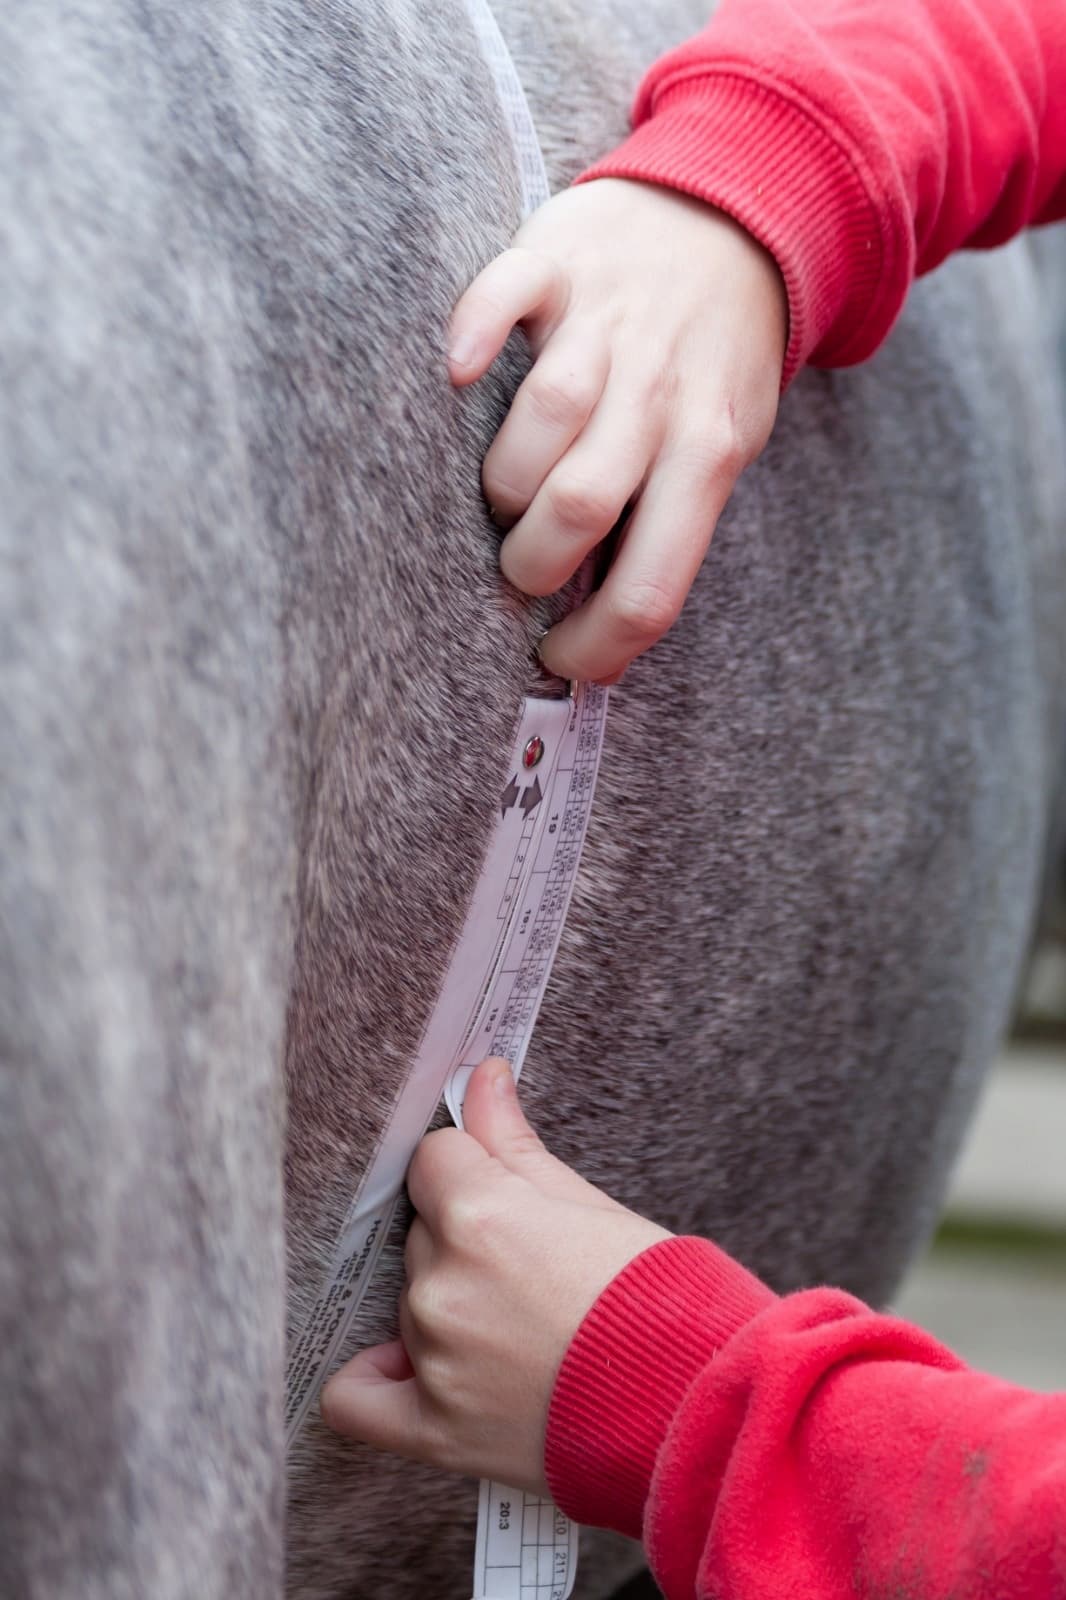 Laminitis and Insulin Resistance